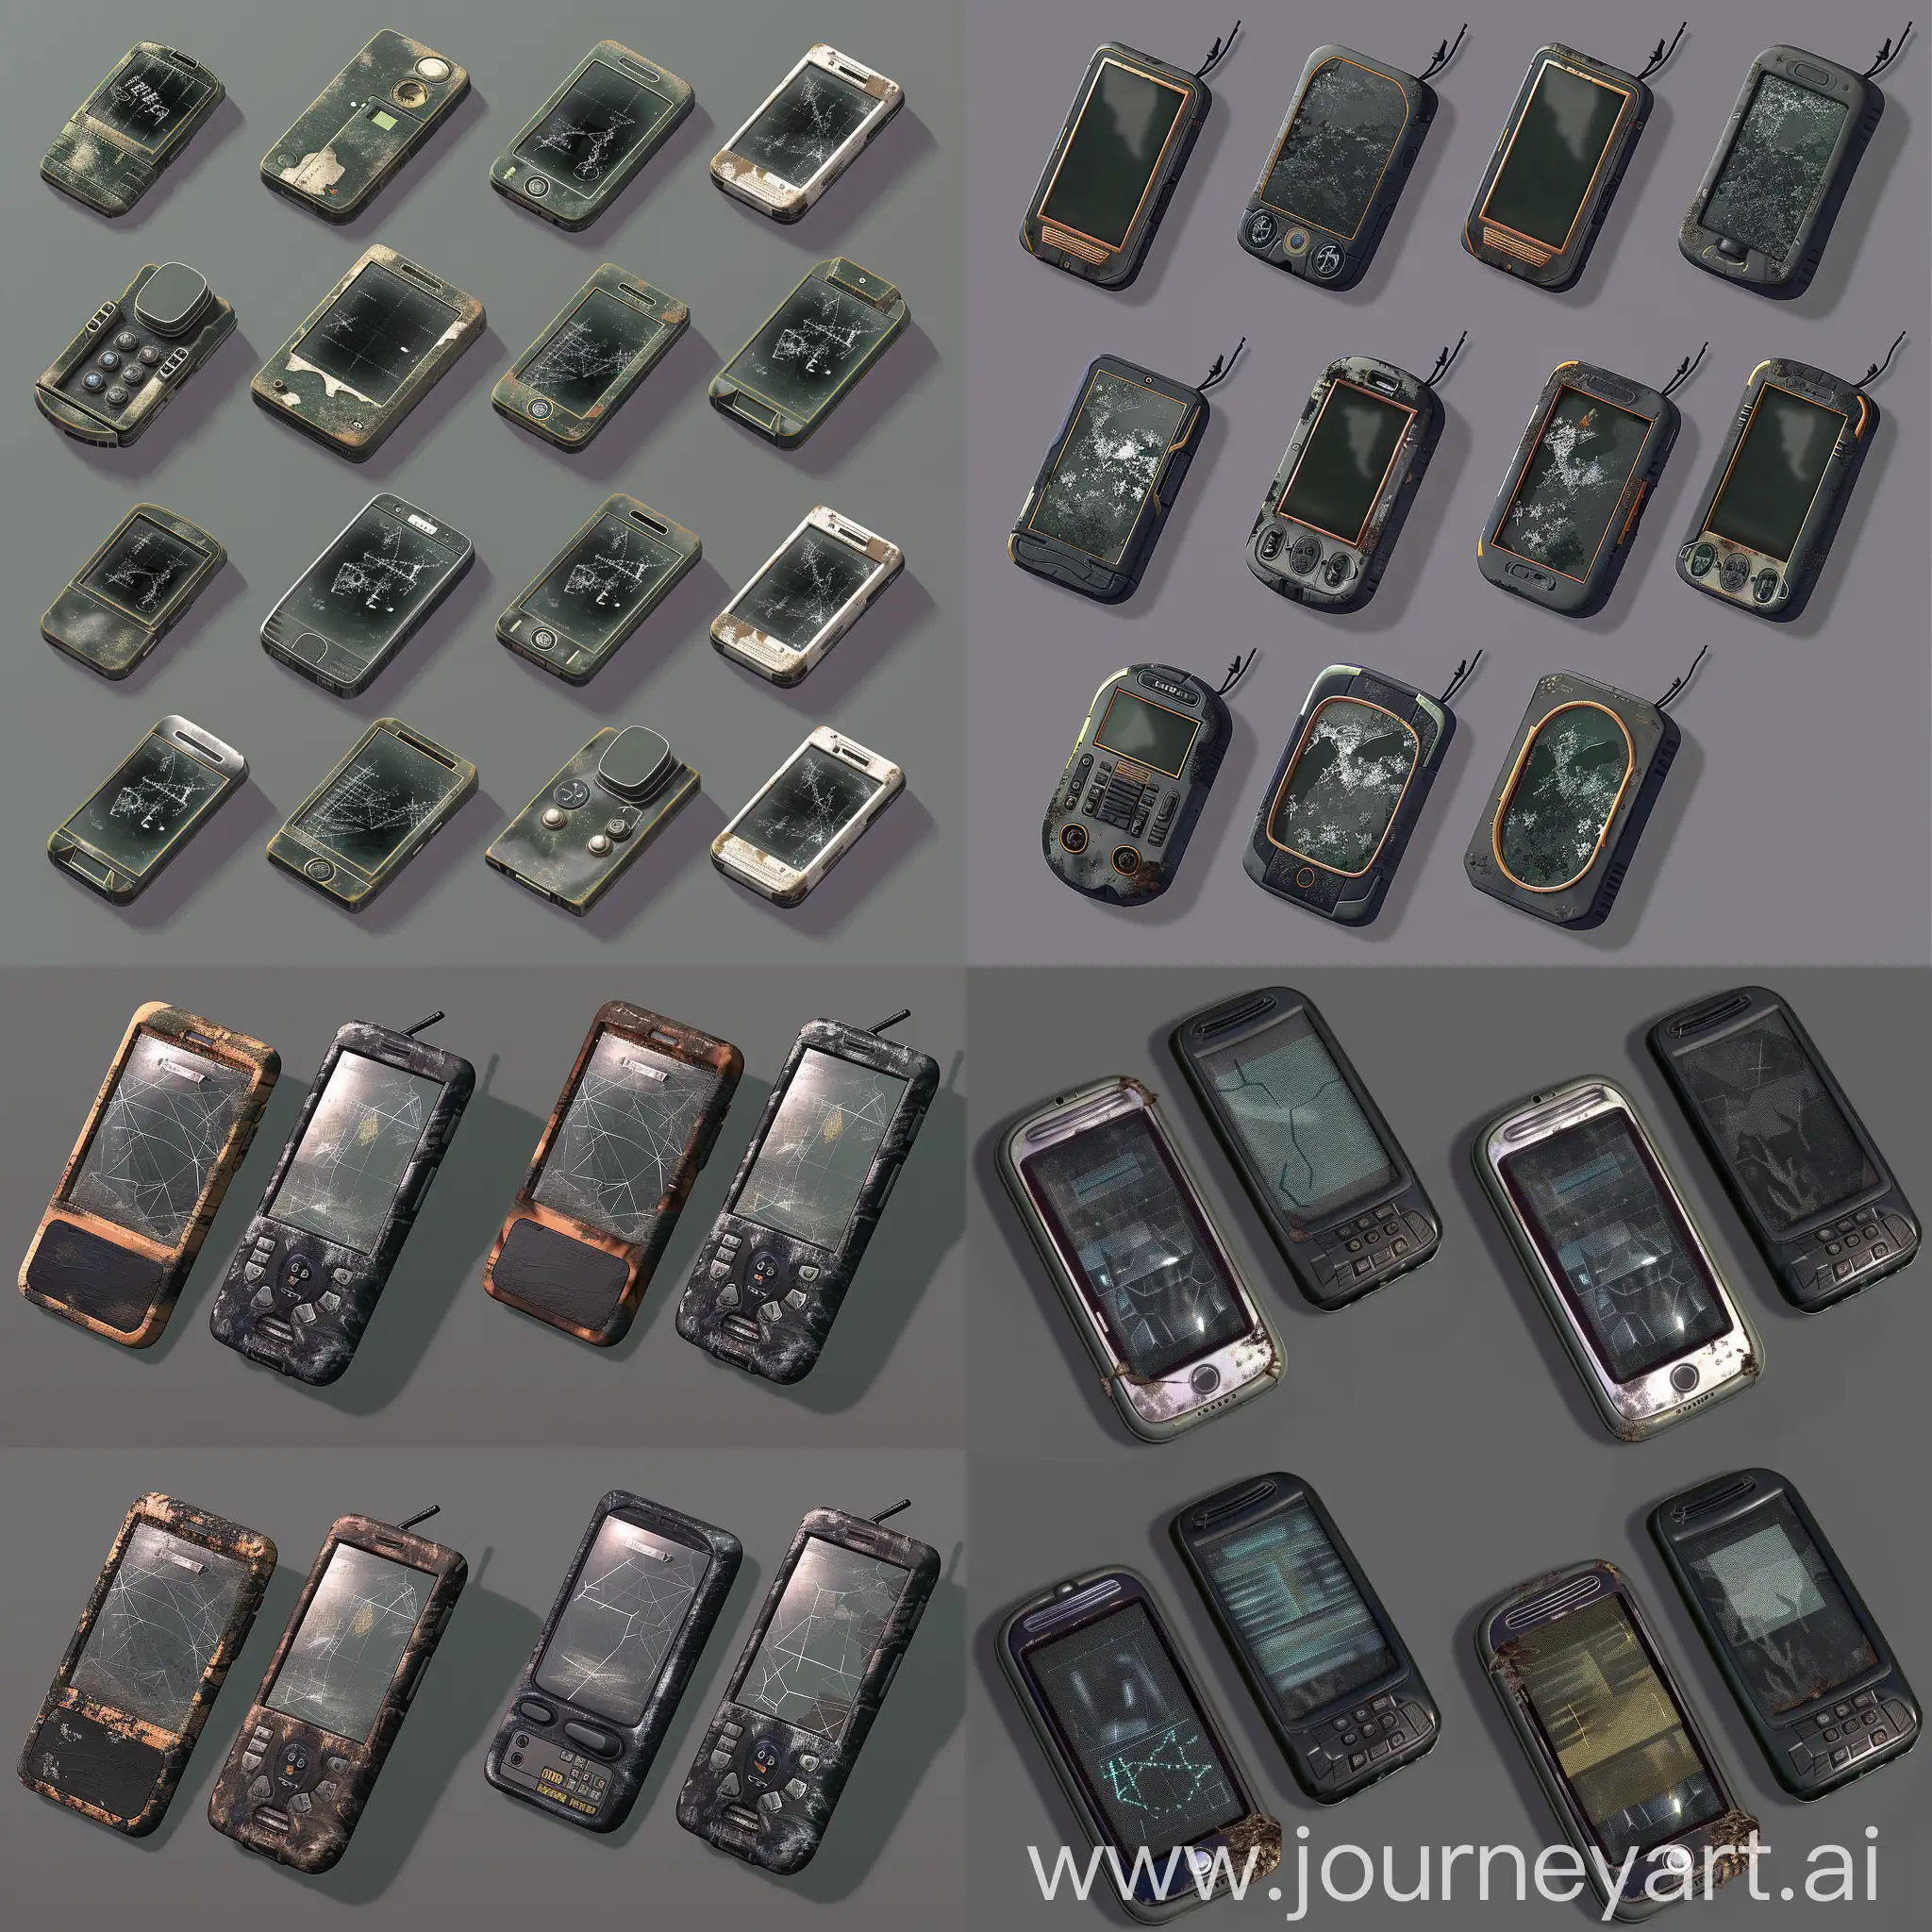 https://i.postimg.cc/YCStjdbR/image.png https://i.postimg.cc/qgf5svT4/image.png realistic photo of isometric set of worn pda, style of stalker game, unreal engine 5 render, ultrarealistic style, isometric set --iw 2 --chaos 20